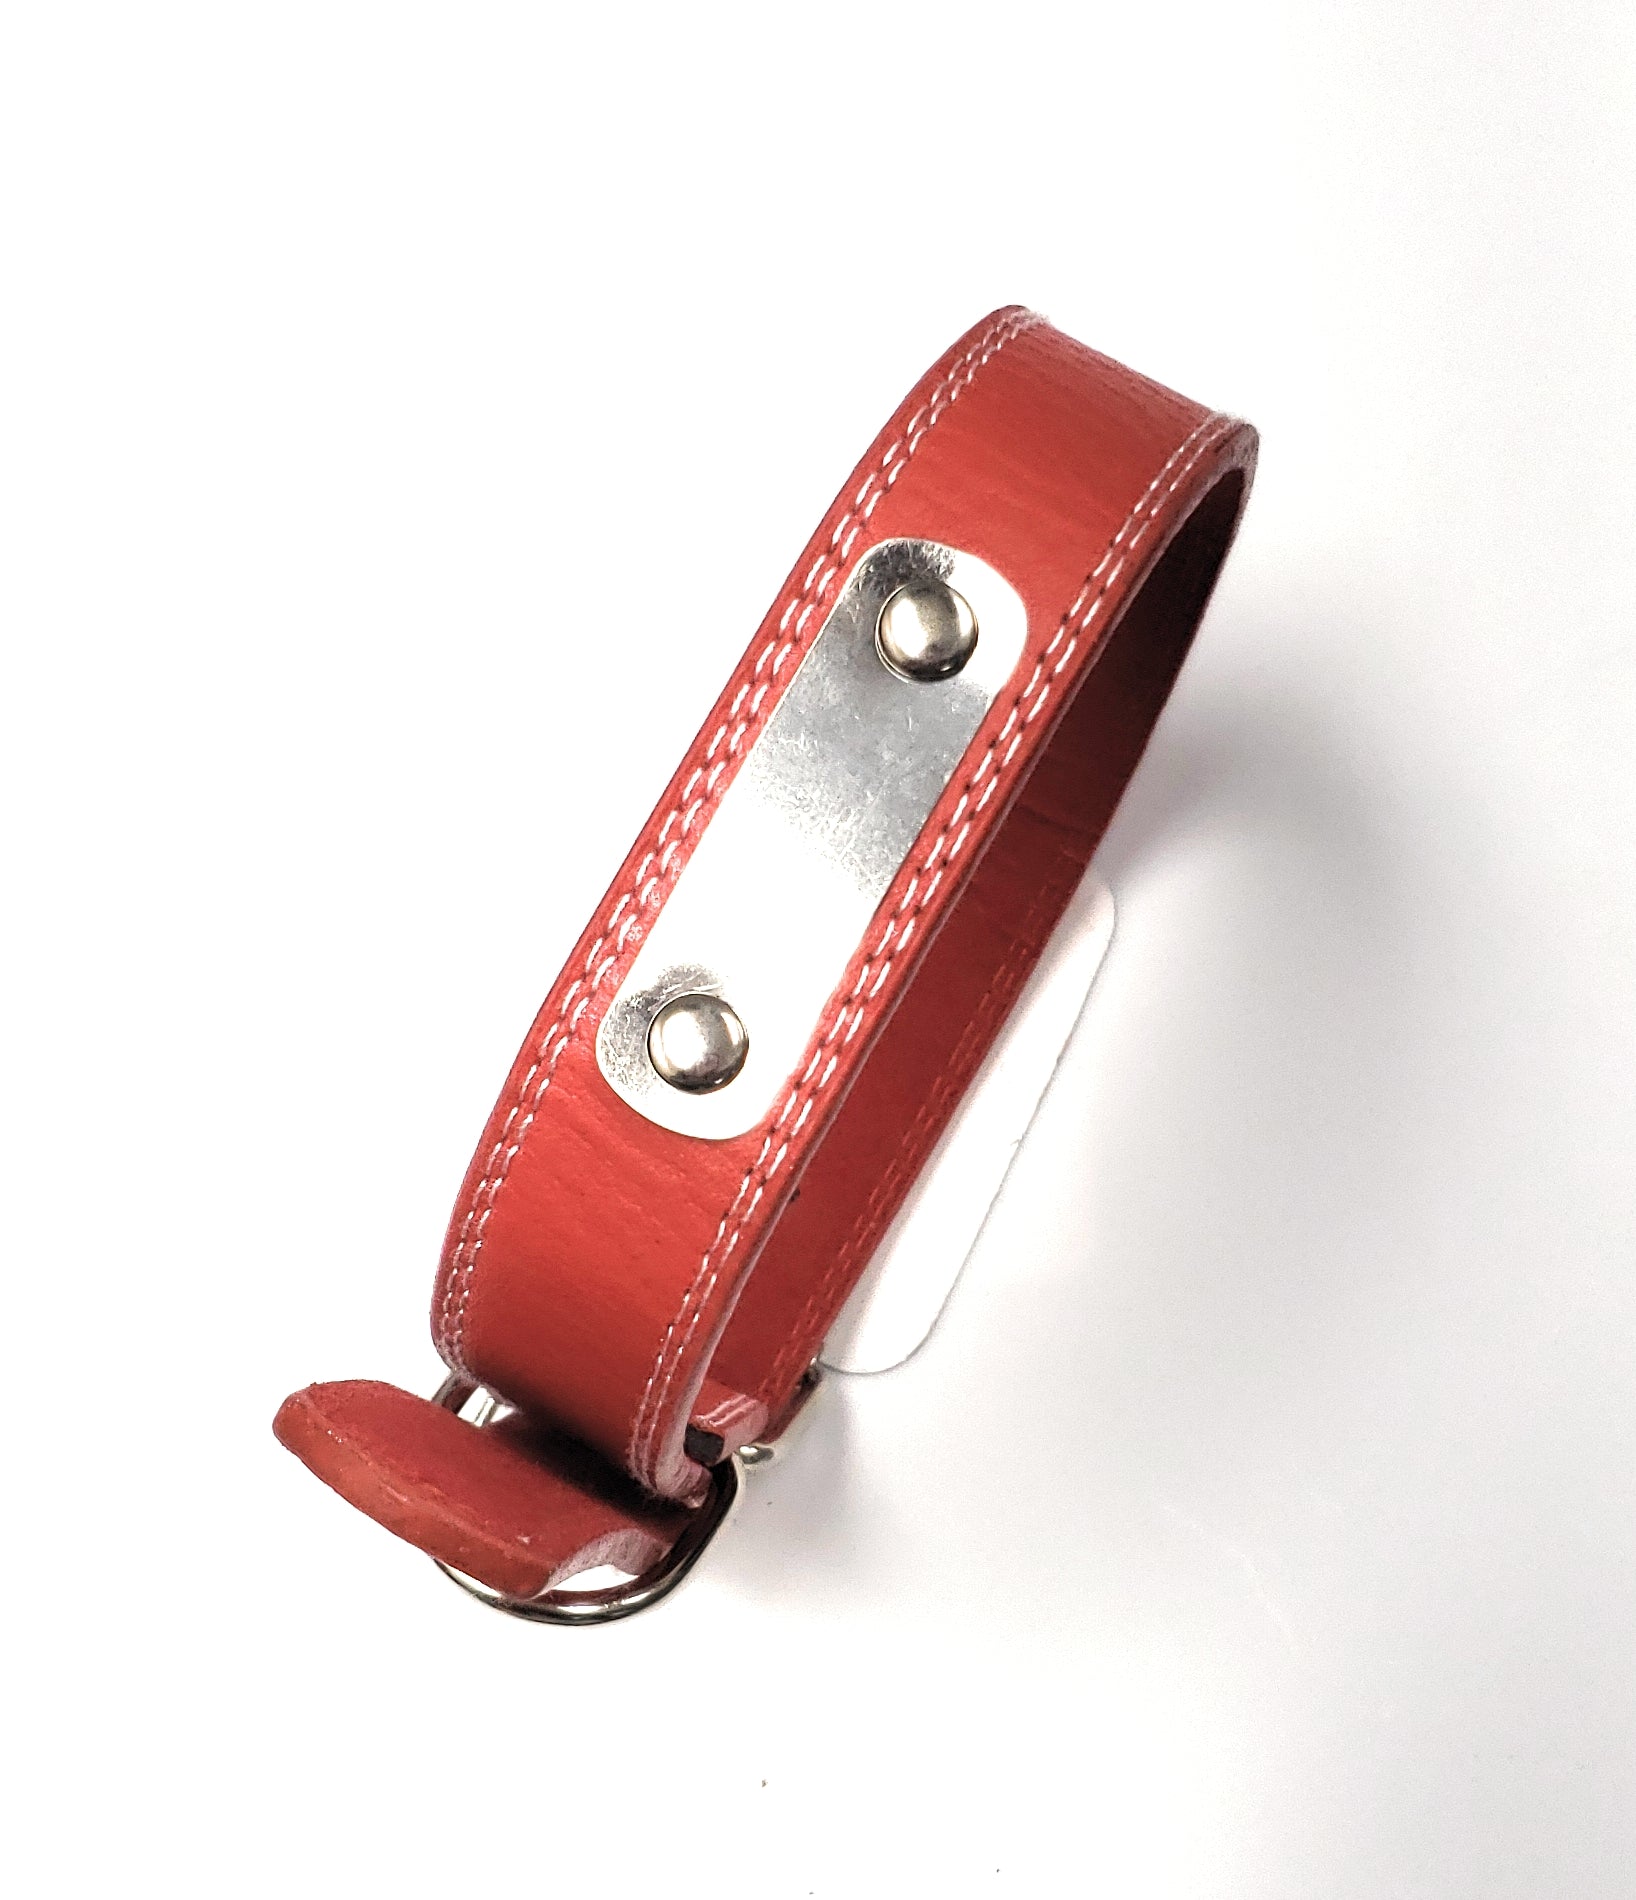 14-18 inch Leather Dog Collar for medium/large dogs. Available in Red, Black, Brown, and Blue. - UproMax